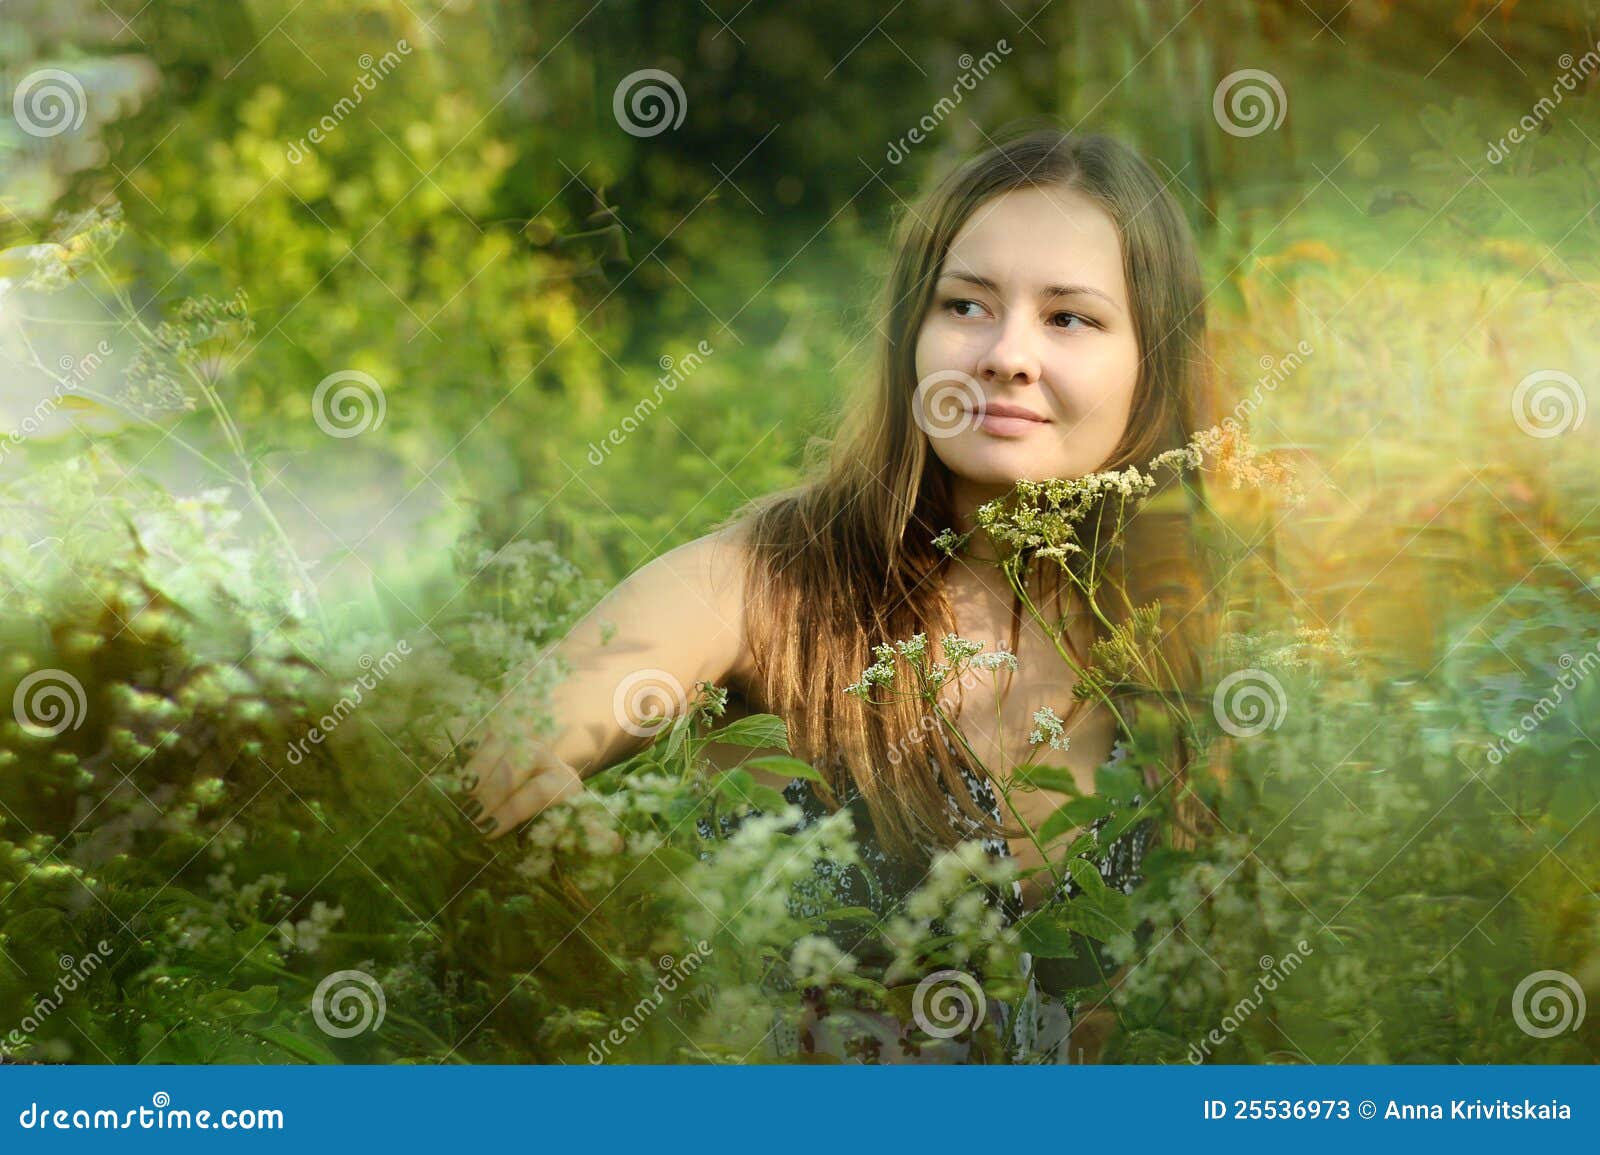 Girl In A Field Of Tall Grasses Stock Image Image Of Female Action